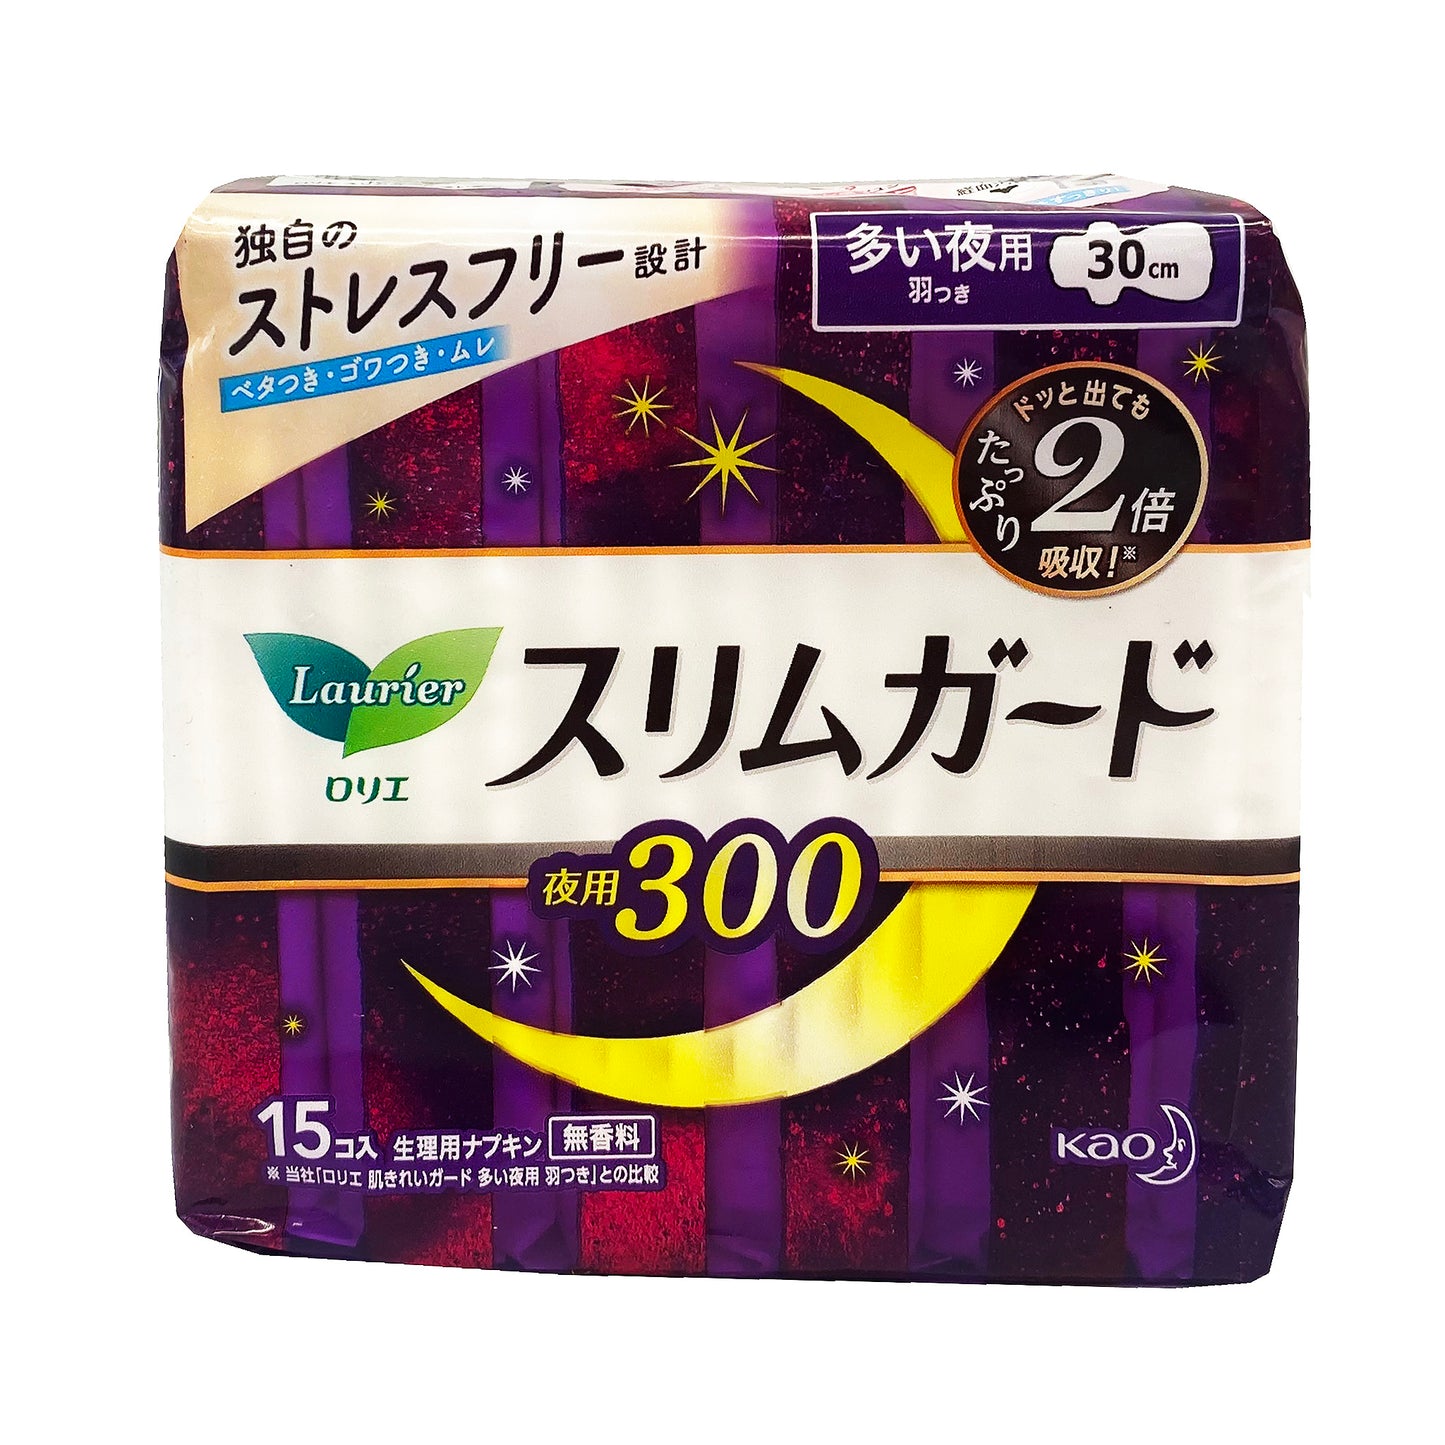 Front graphic view of Kao Laurier Sanitary Napkin Slim Guard for Night (15 pcs) 30cm